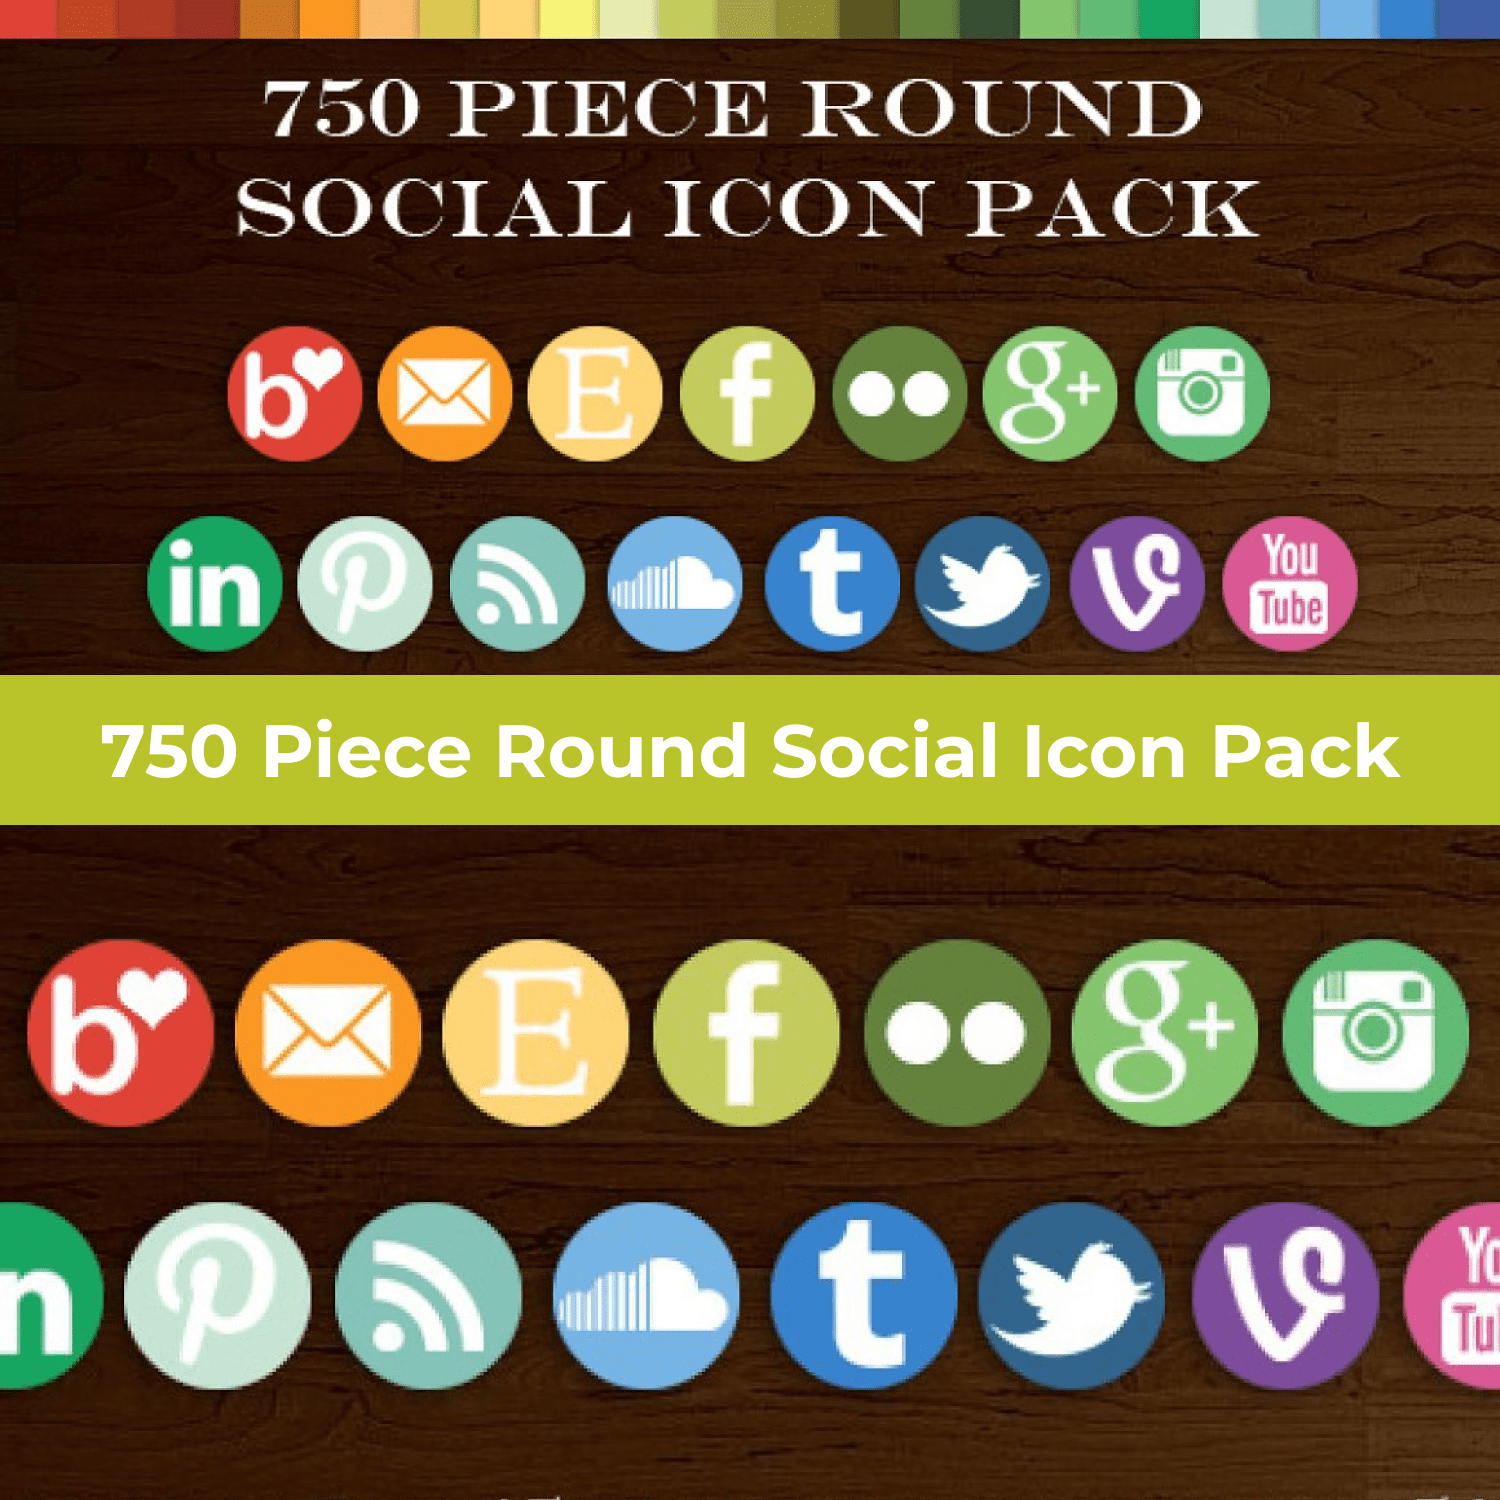 750 Piece Round Social Icon Pack cover image.